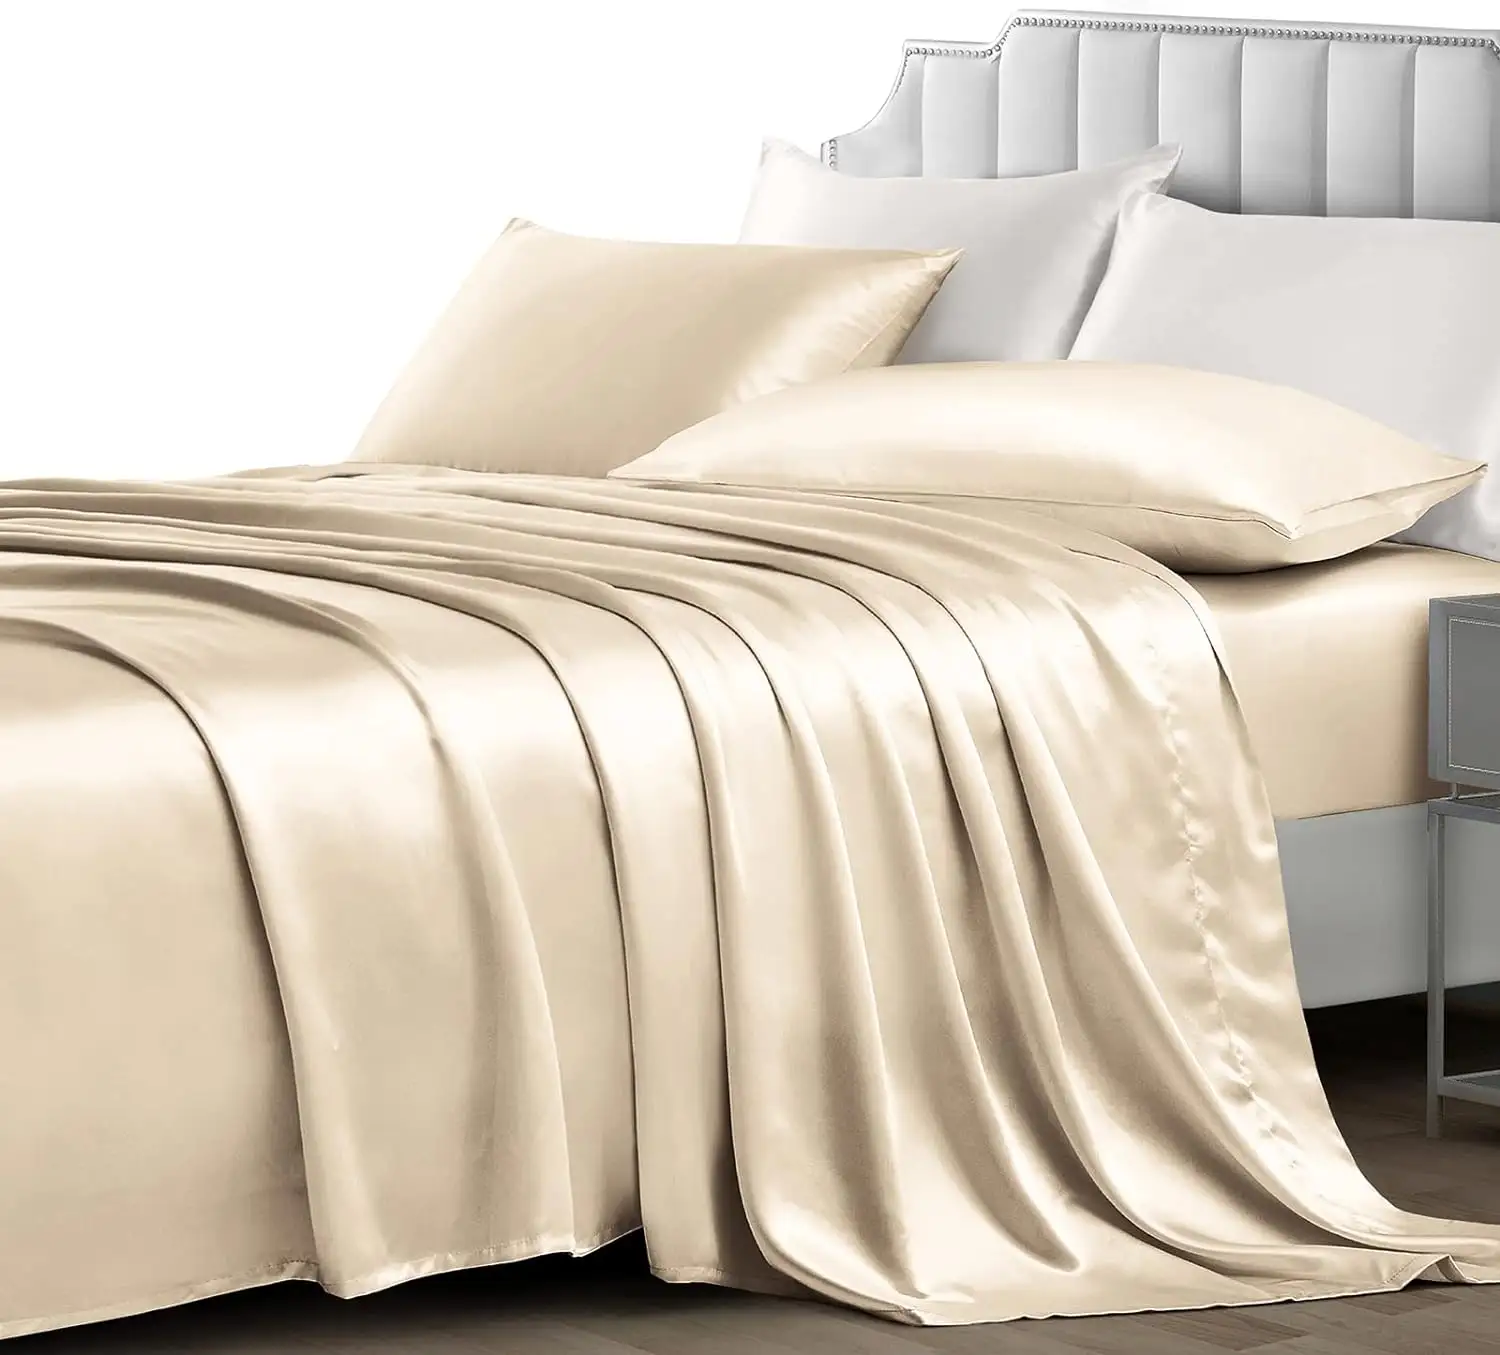 Silky Satin with 1 Fitted Sheet 1 Flat Sheet and 2 Pillowcases Cooling Satin Bedding Sheets